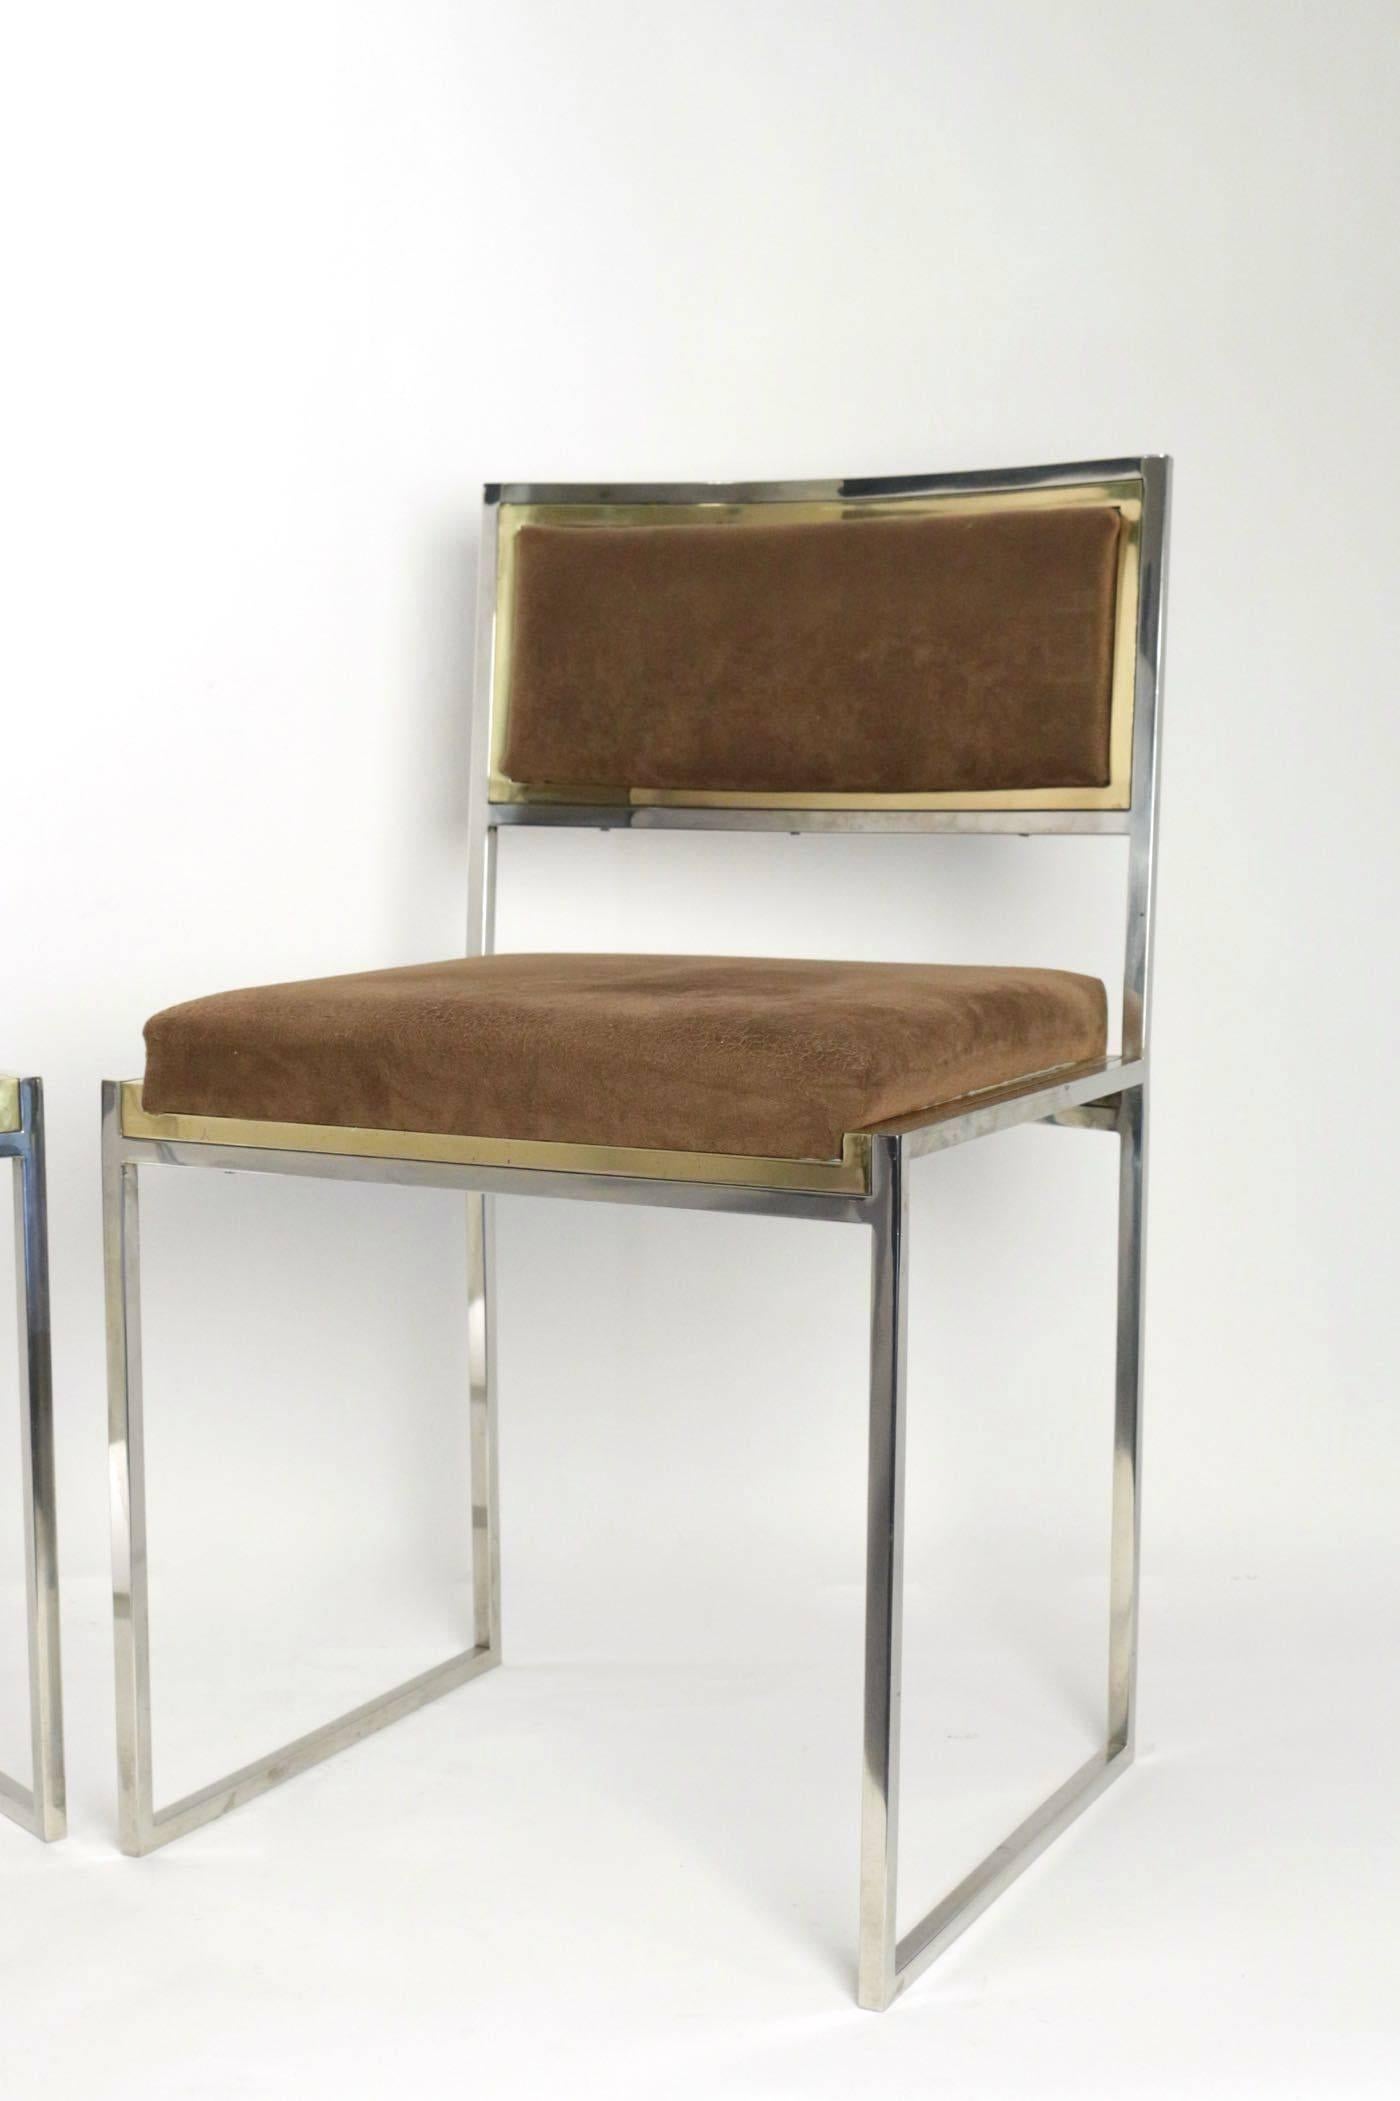 Beautiful set of four chrome and gilded brass chairs by Willy Rizzo, France, 1970s
Upholstered in light brown alcantara
Beautiful condition.